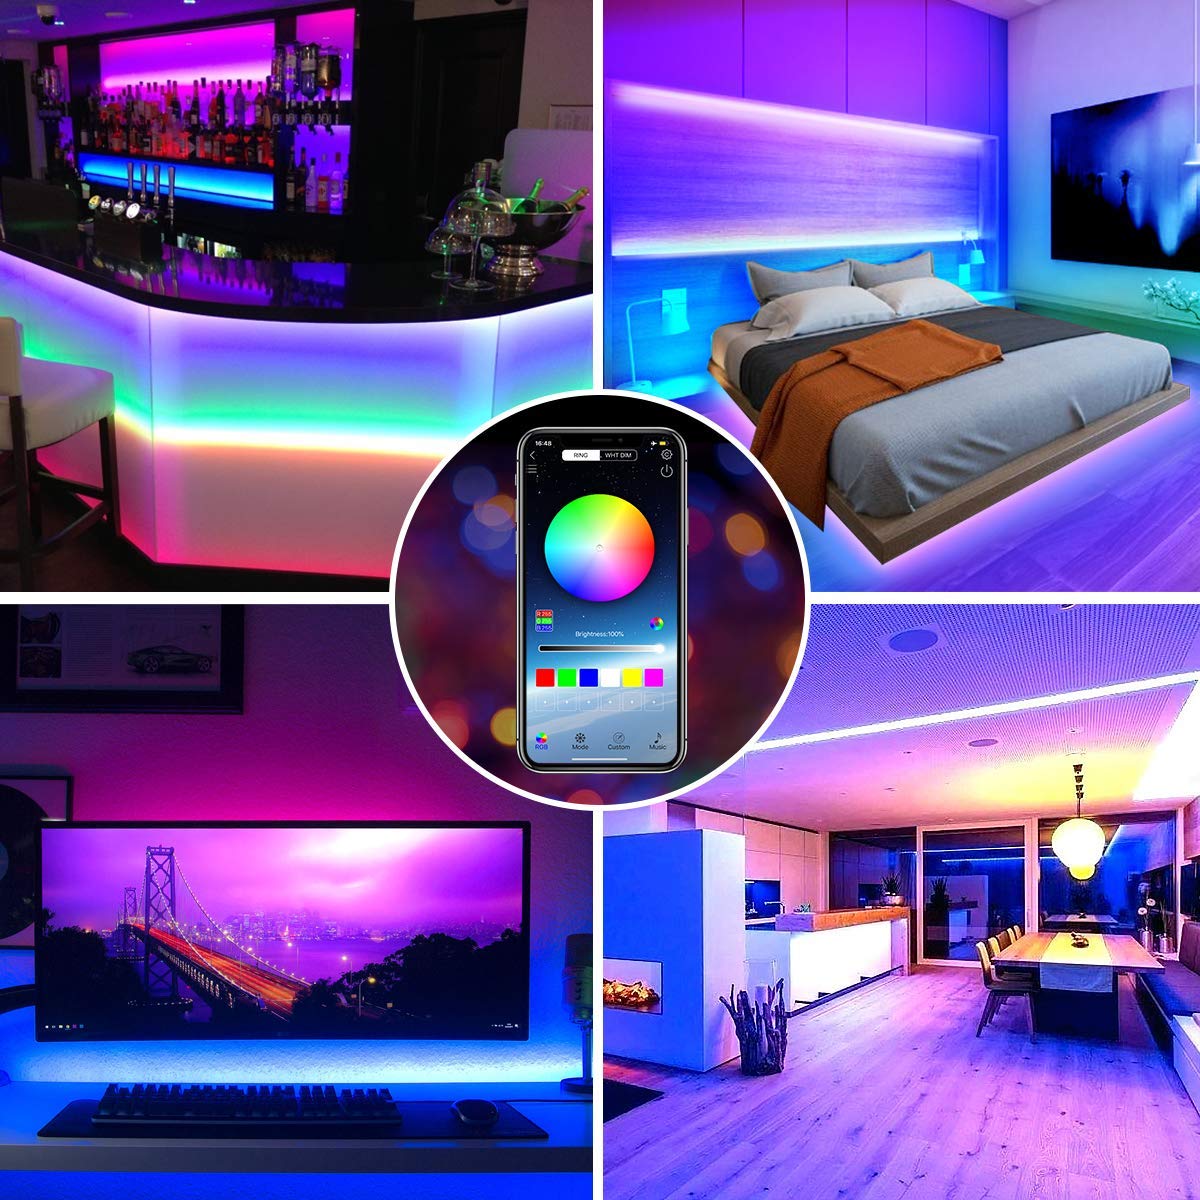 LED Strips Lights, RGB Light Strip 10M(2x5M) 32.8ft 300 LEDs 5050 SMD Strips Lighting Kit with APP, Colour Changing Rope Lights with RF Remote, Music Sync for Party Home Christmas Decoration